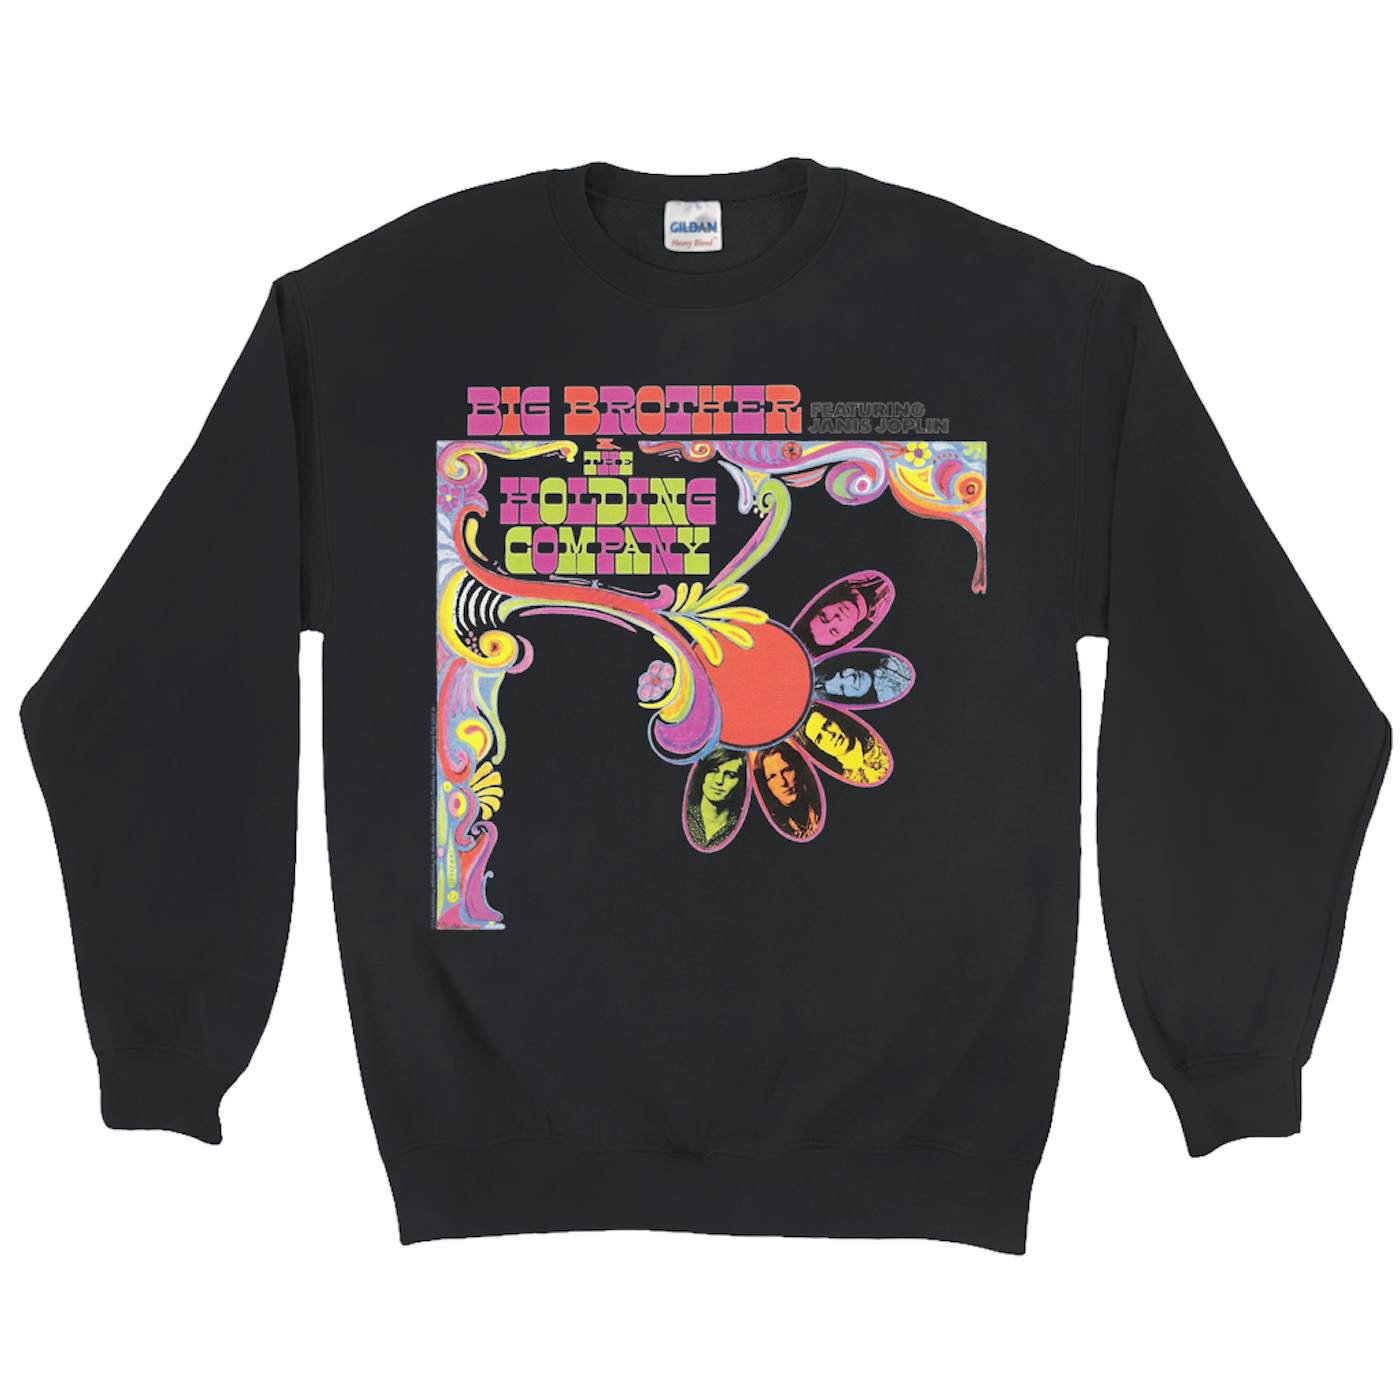 Big Brother and The Holding Co. Sweatshirt | Big Brother & The Holding Company Feat. Janis Joplin Album Cover Big Brother and The Holding Co. Sweatshirt